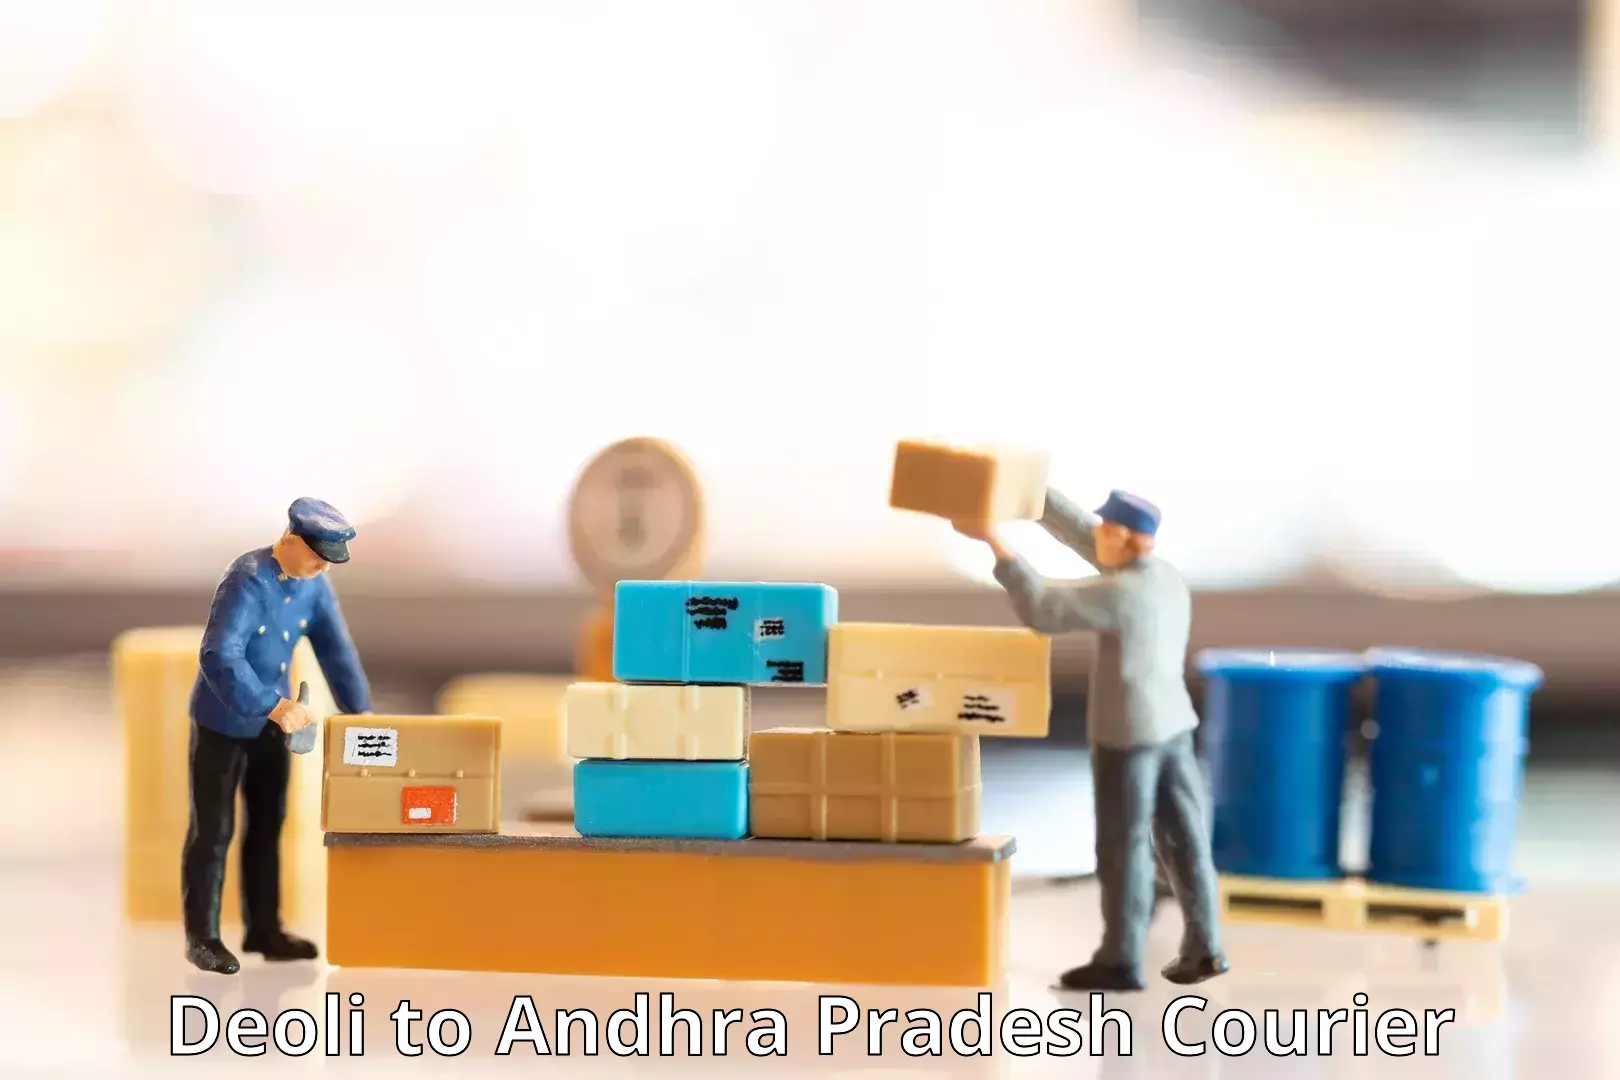 Global courier networks Deoli to Andhra Pradesh